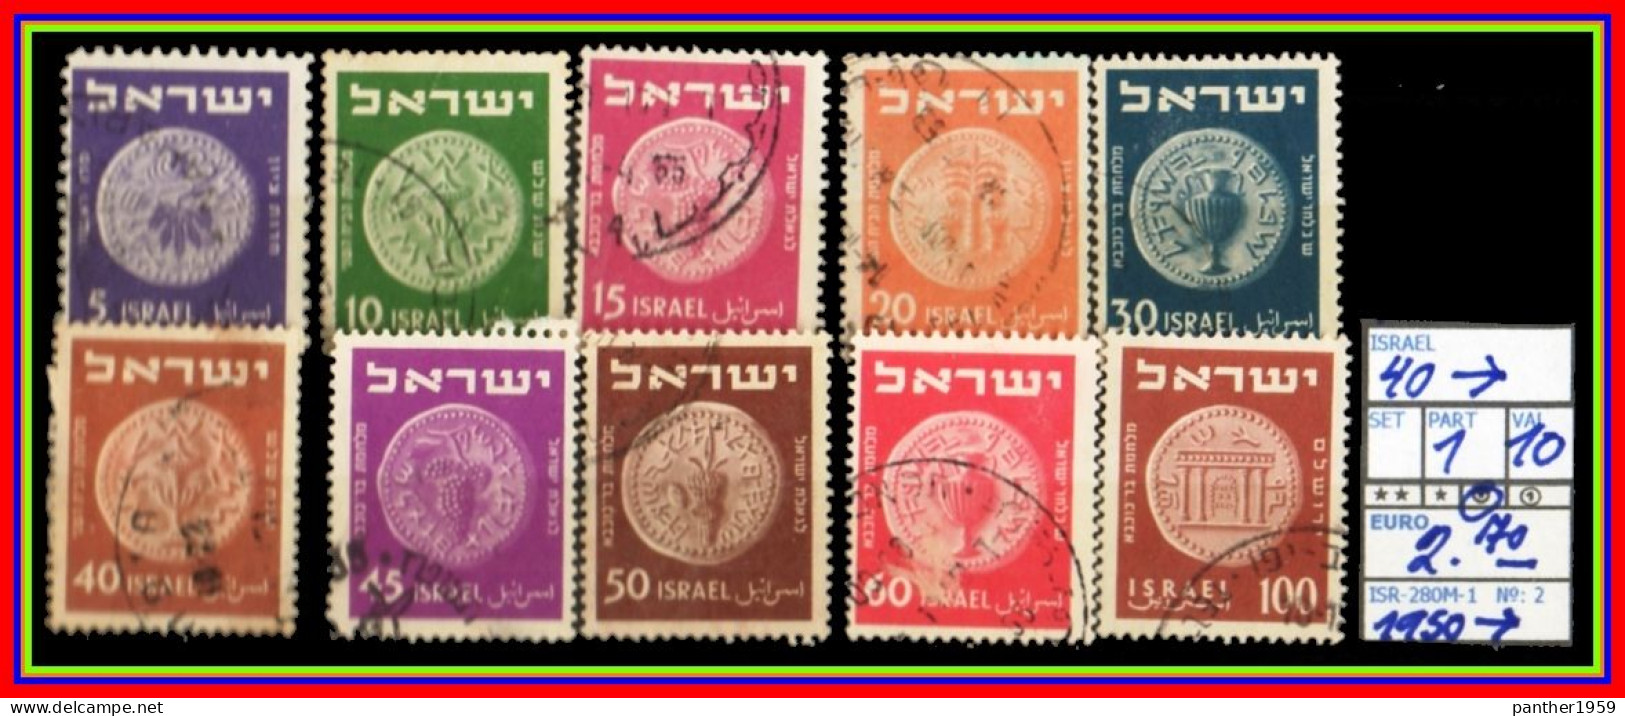 ASIA# ISRAEL# REPUBLIC#DEFINITVES#PARTIAL SET# USED# (ISR-280M-1) (02) - Used Stamps (without Tabs)